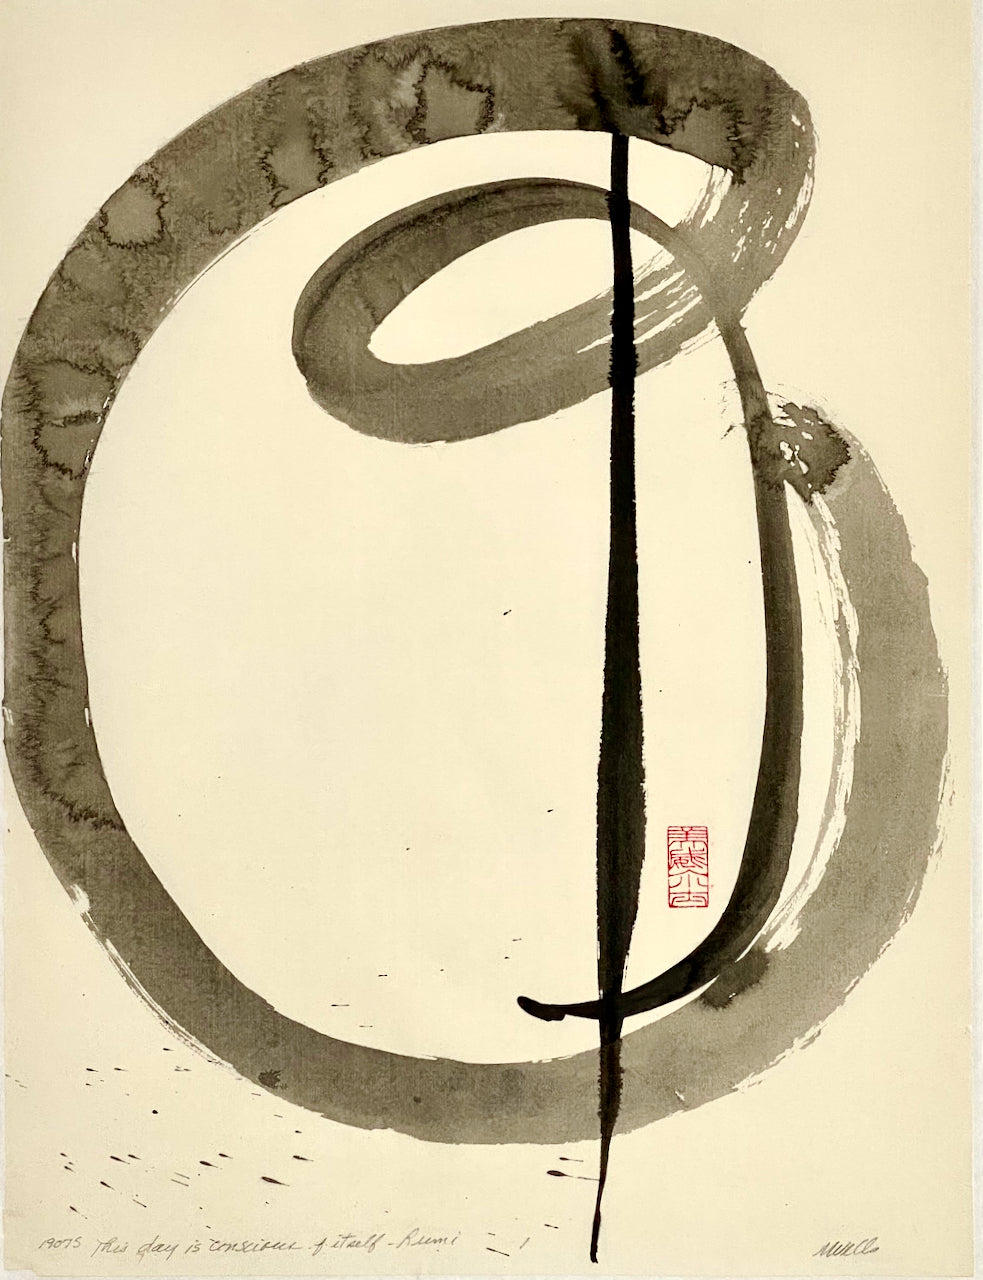 “This Day is Conscious" by Marilyn Wells. Abstract sumi e Original